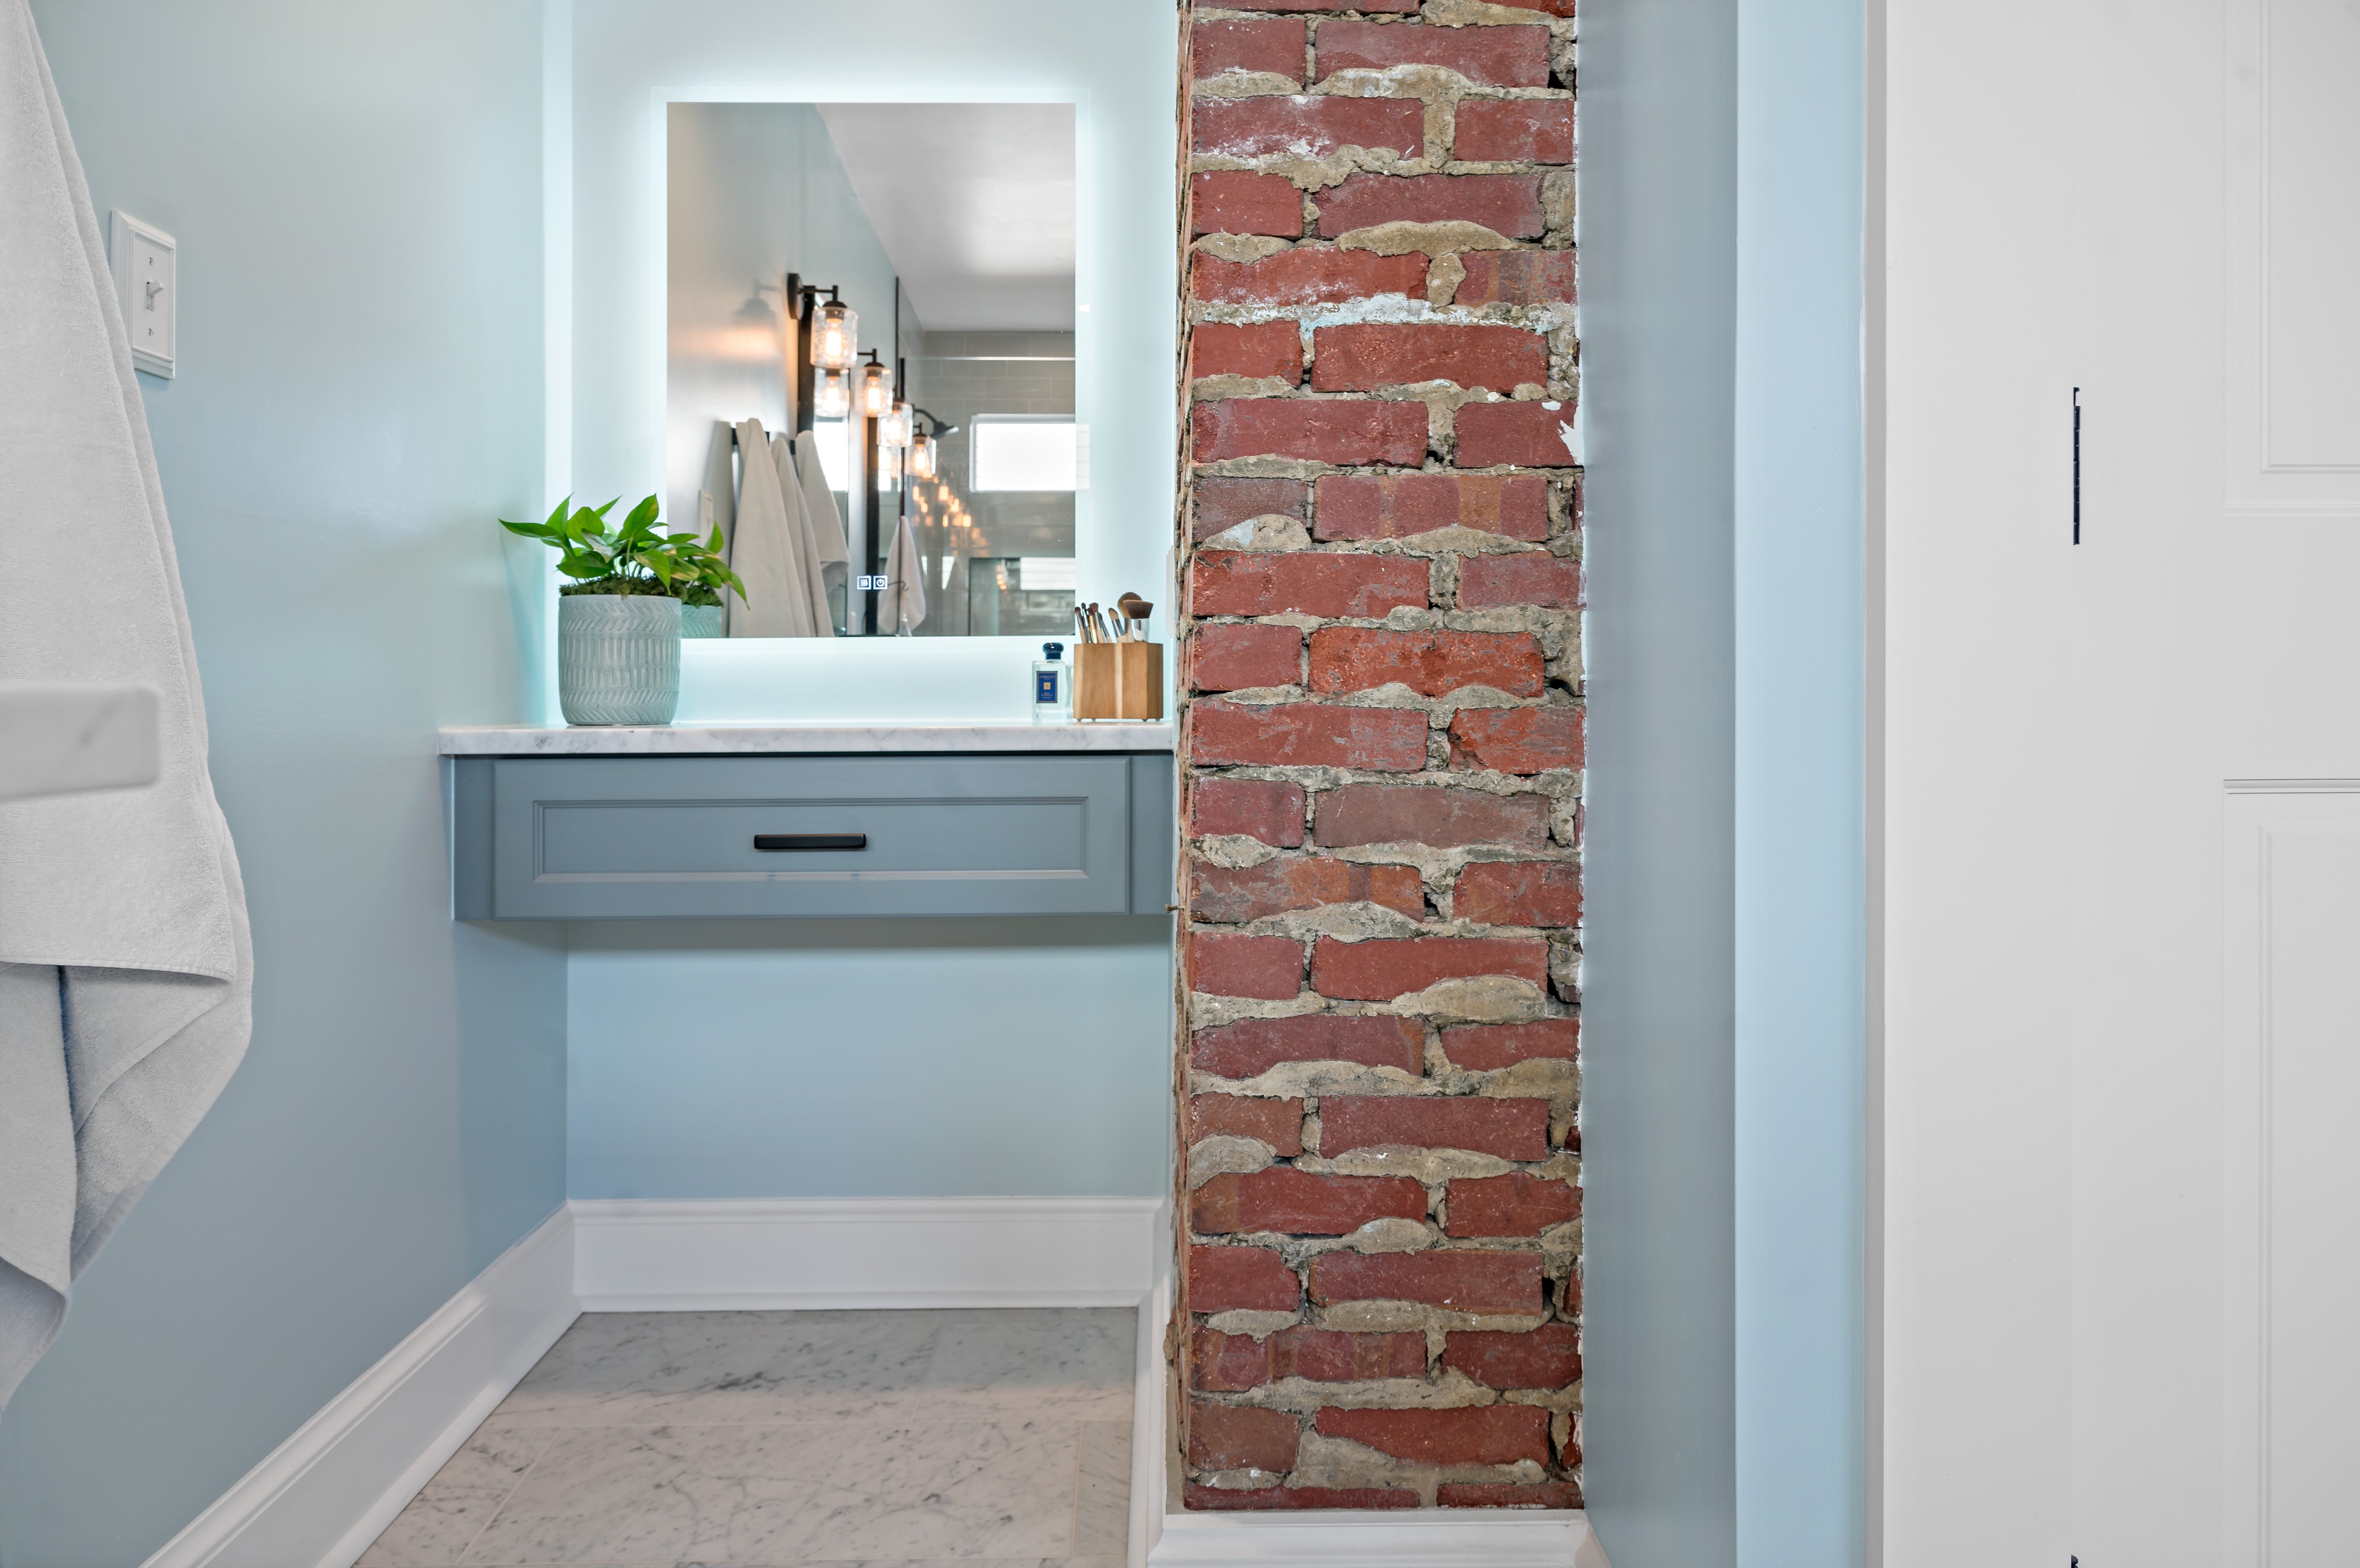 Exposed brick accent wall in bathroom